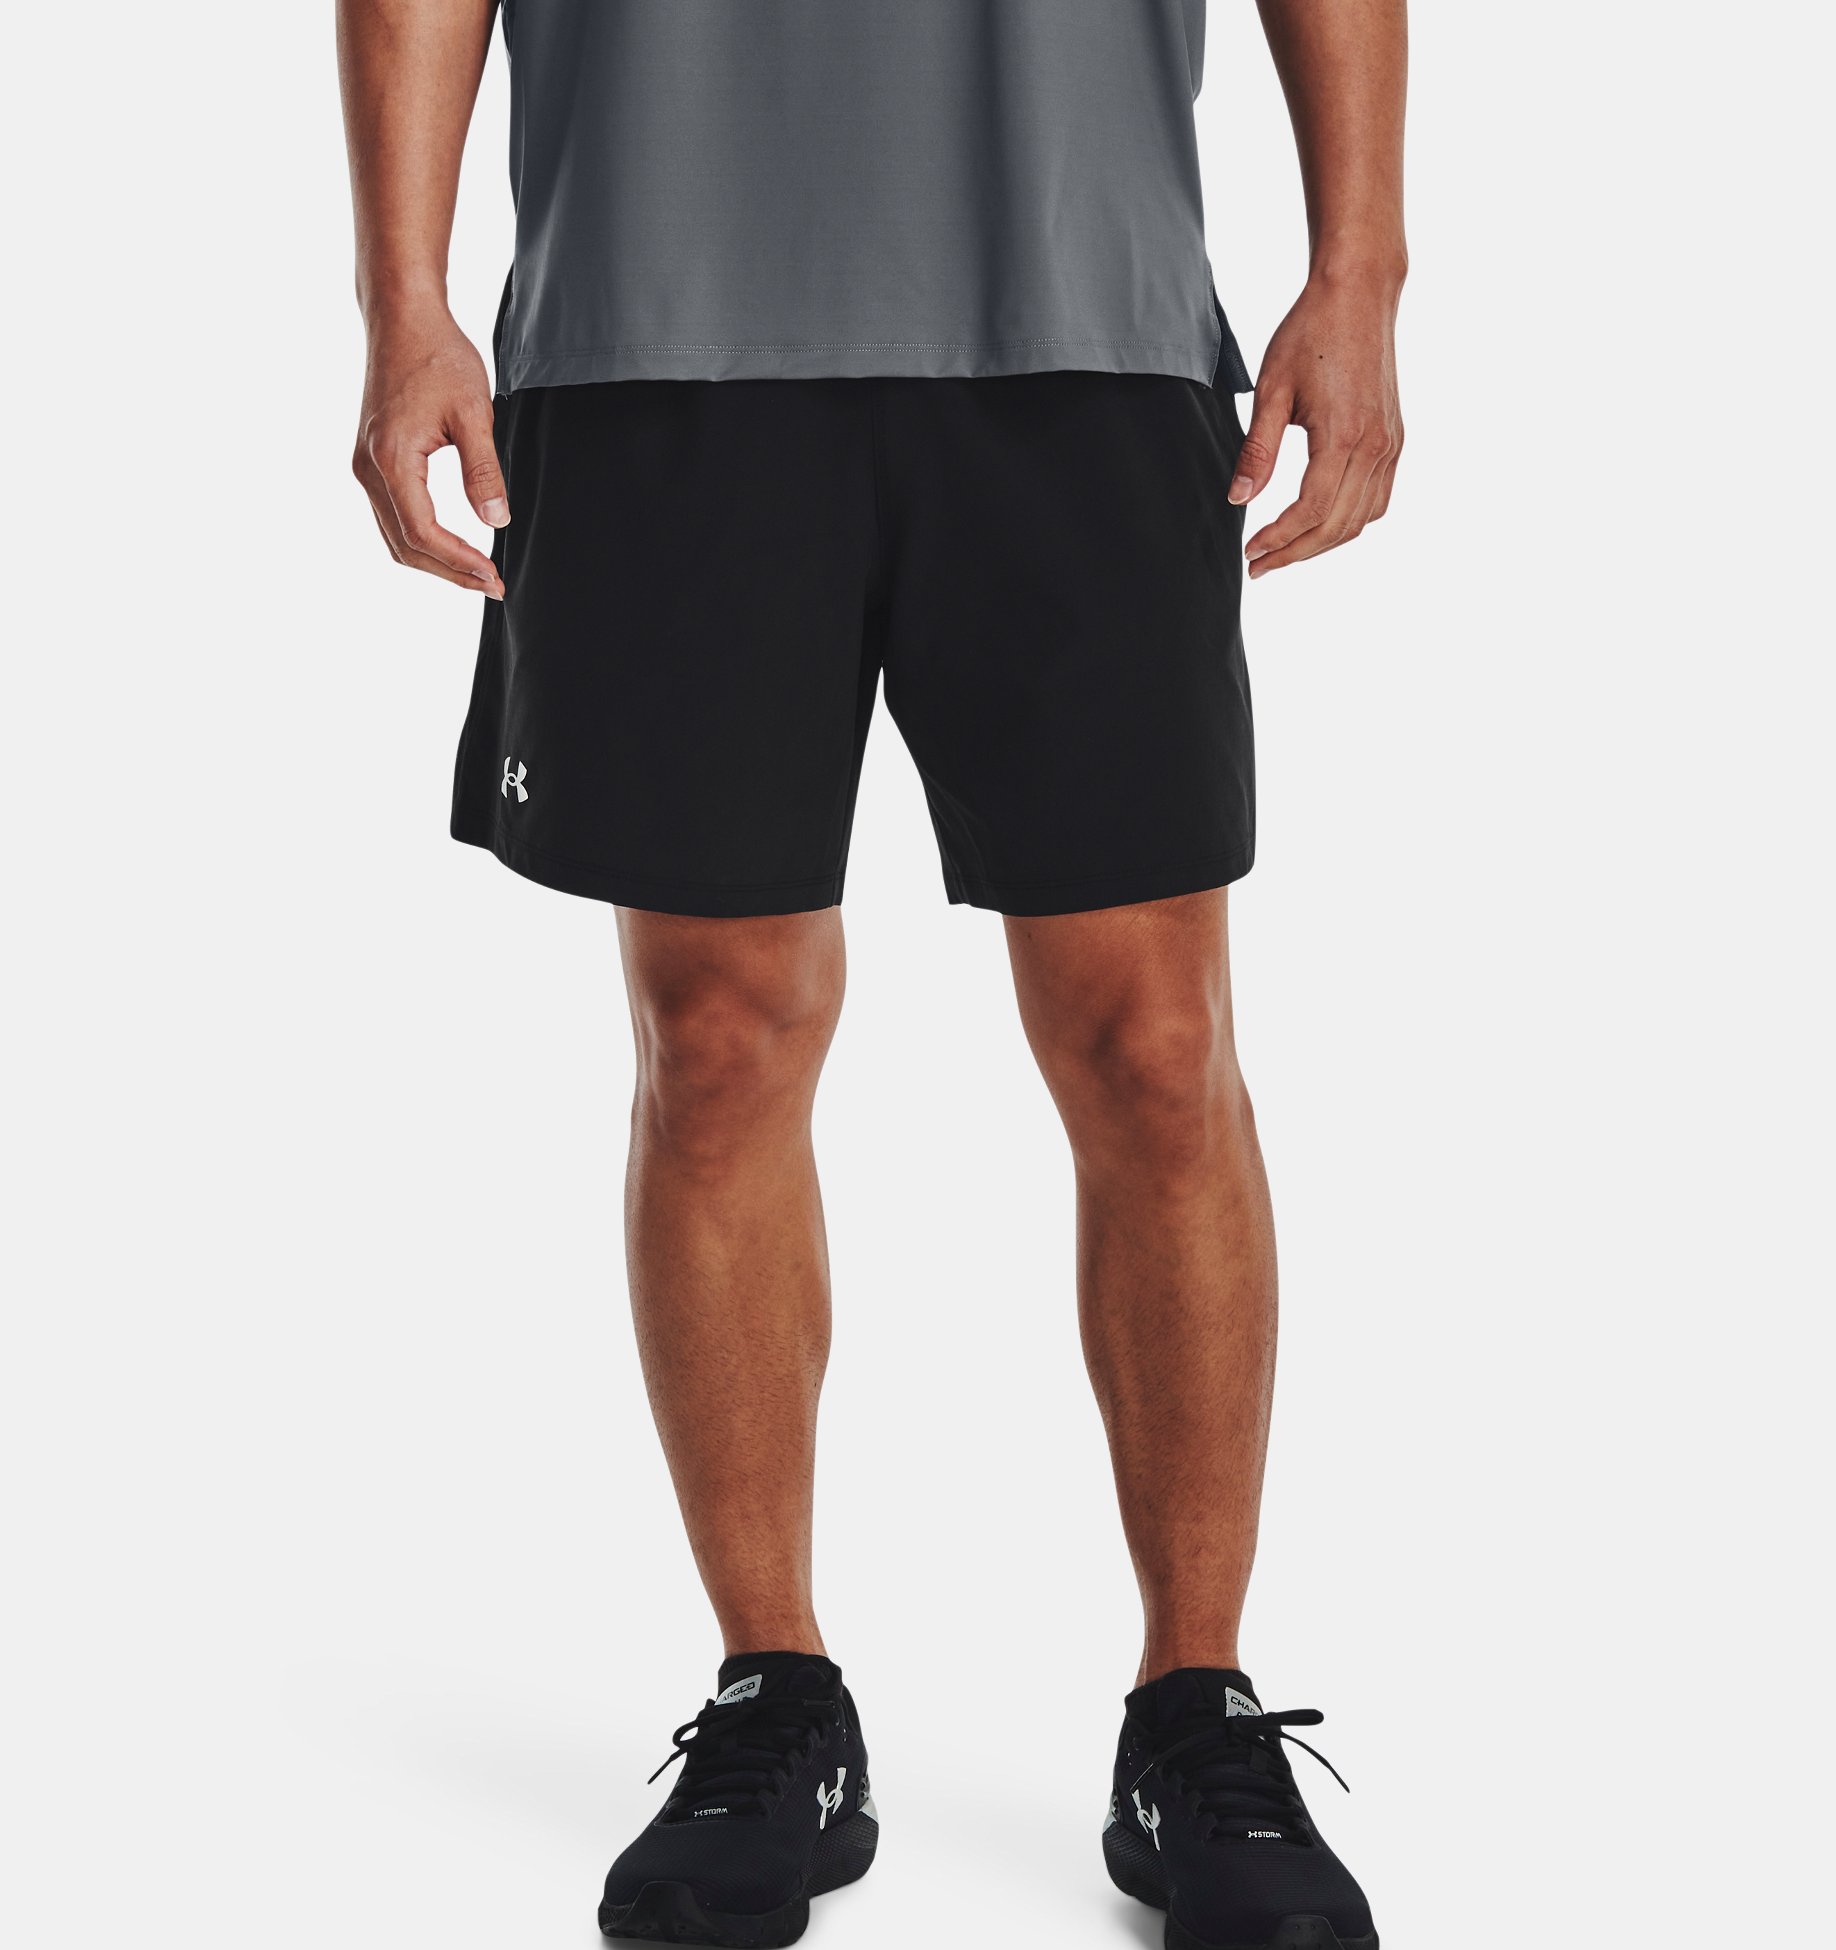 0088 Under Armour Men's Athletic Basketball Gym No Pocket Shorts FREE SHIPPING 